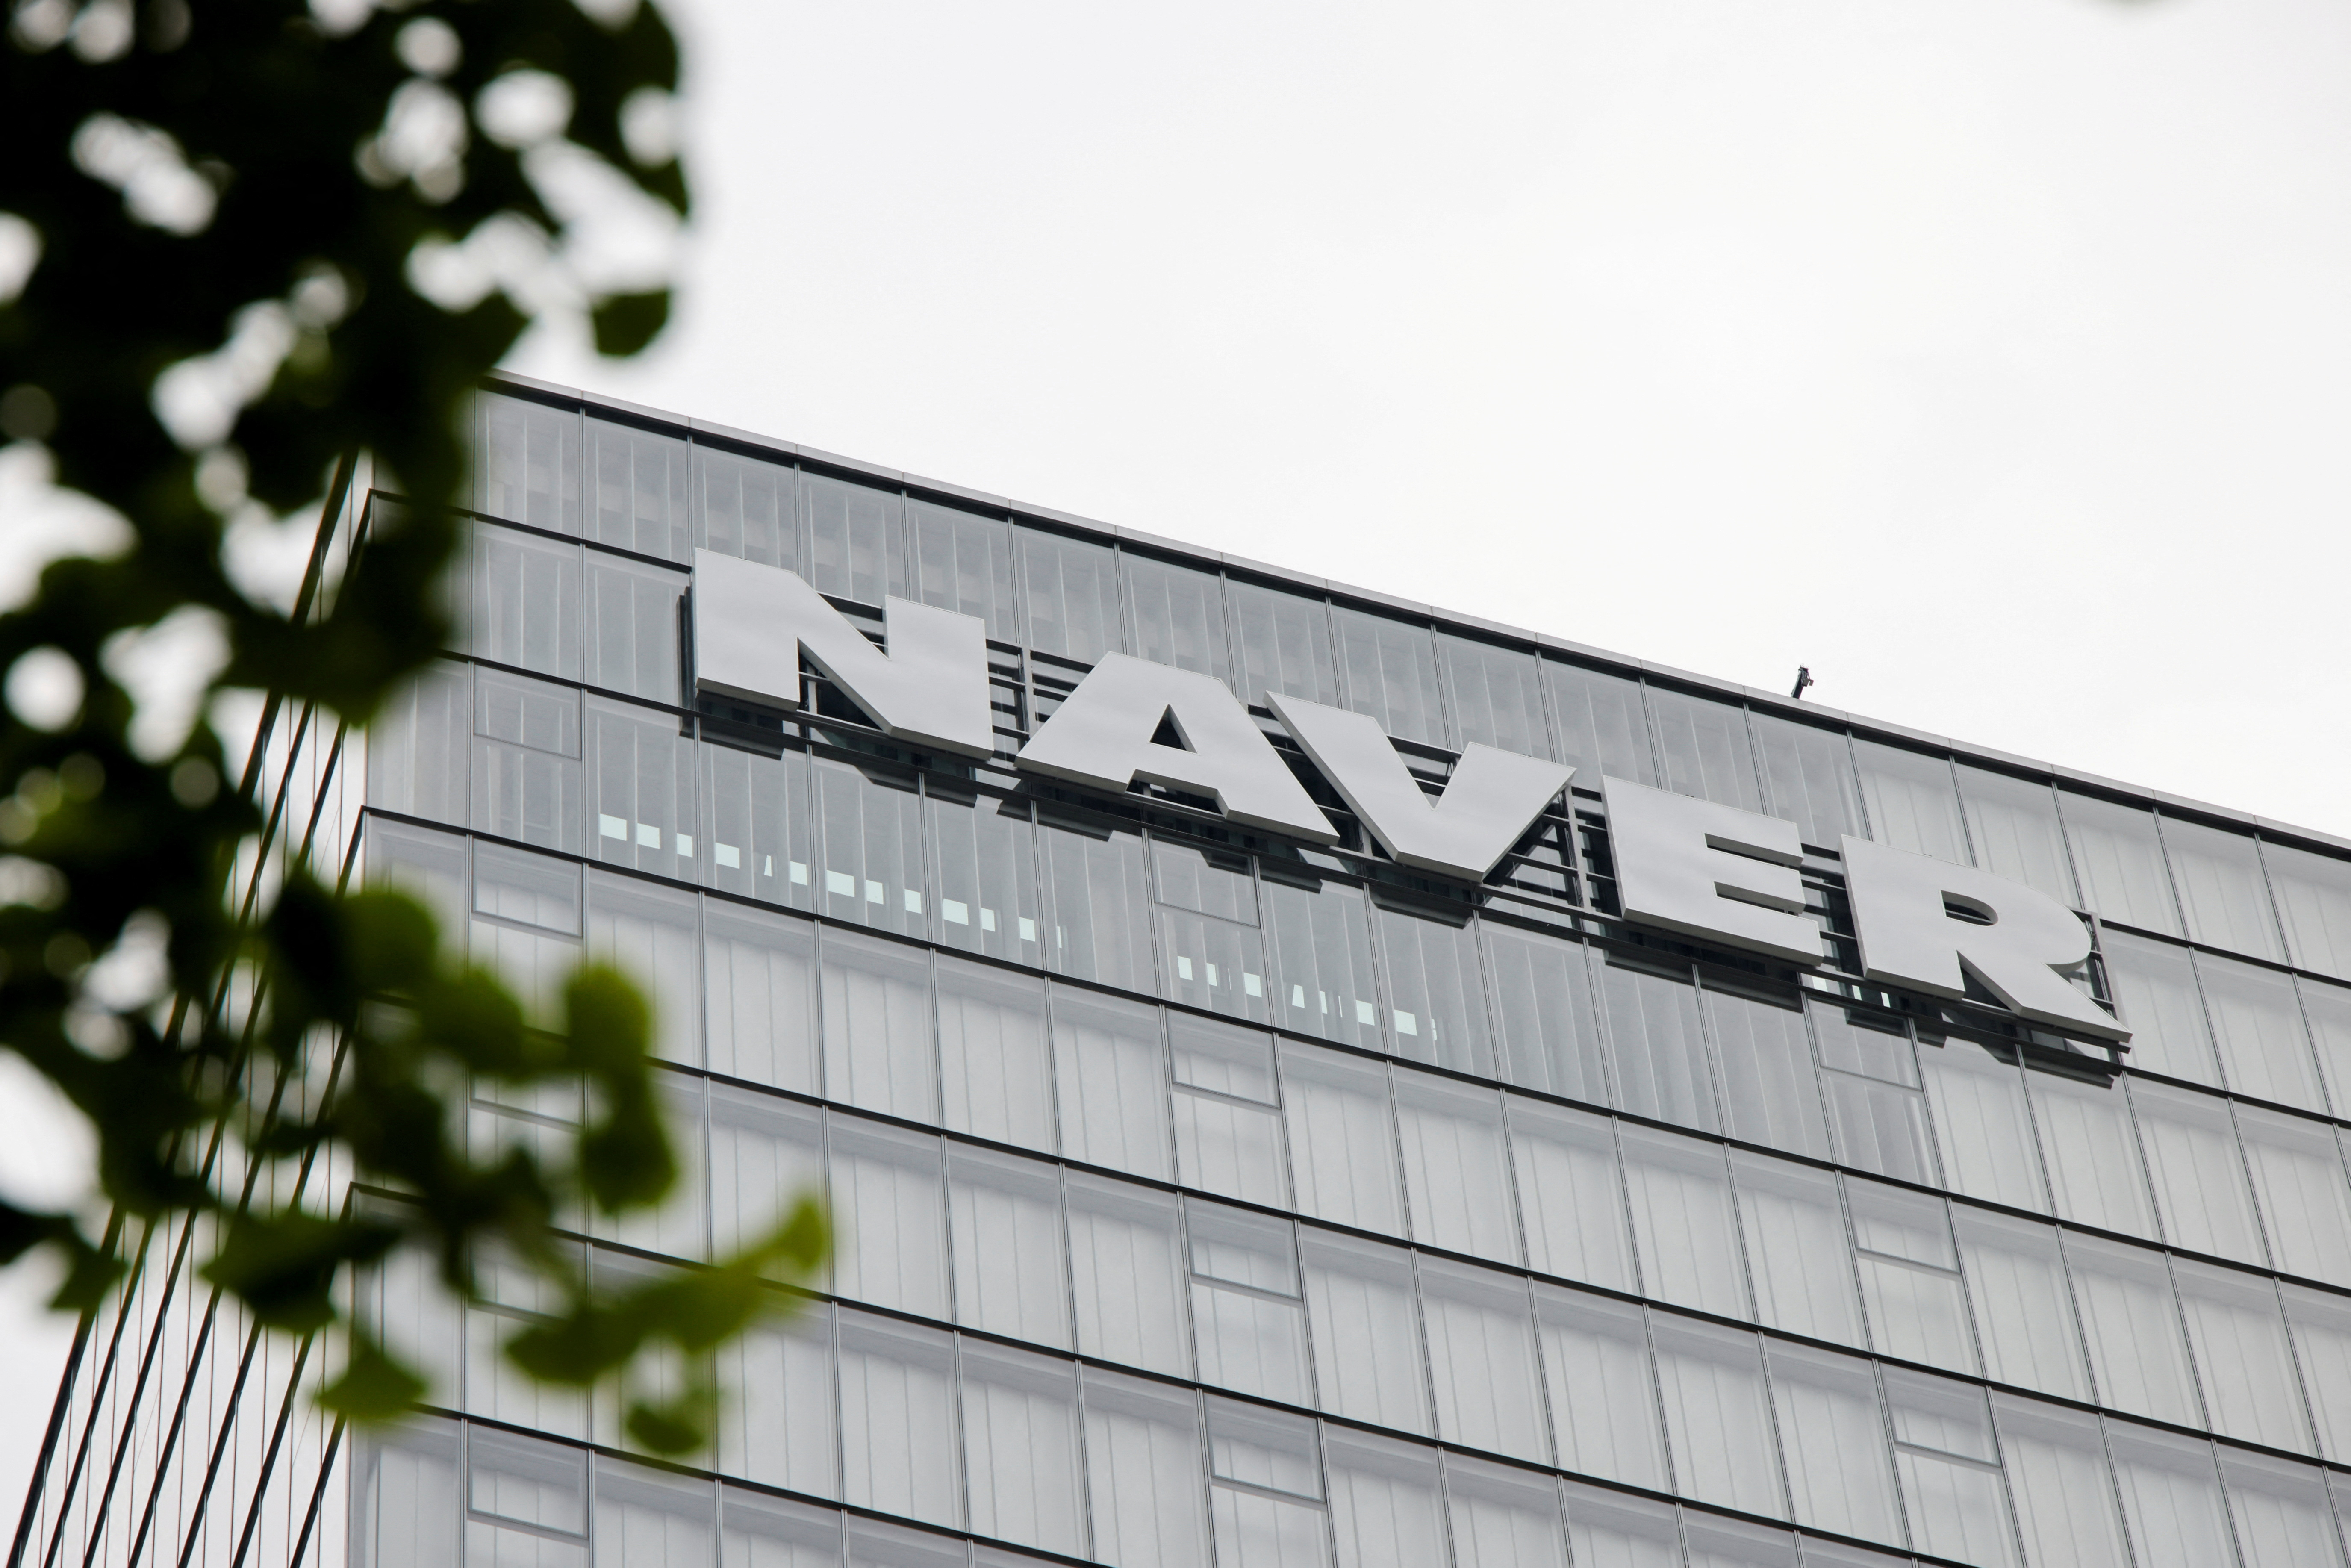 A general view of the Naver sign on its office building in Seongnam